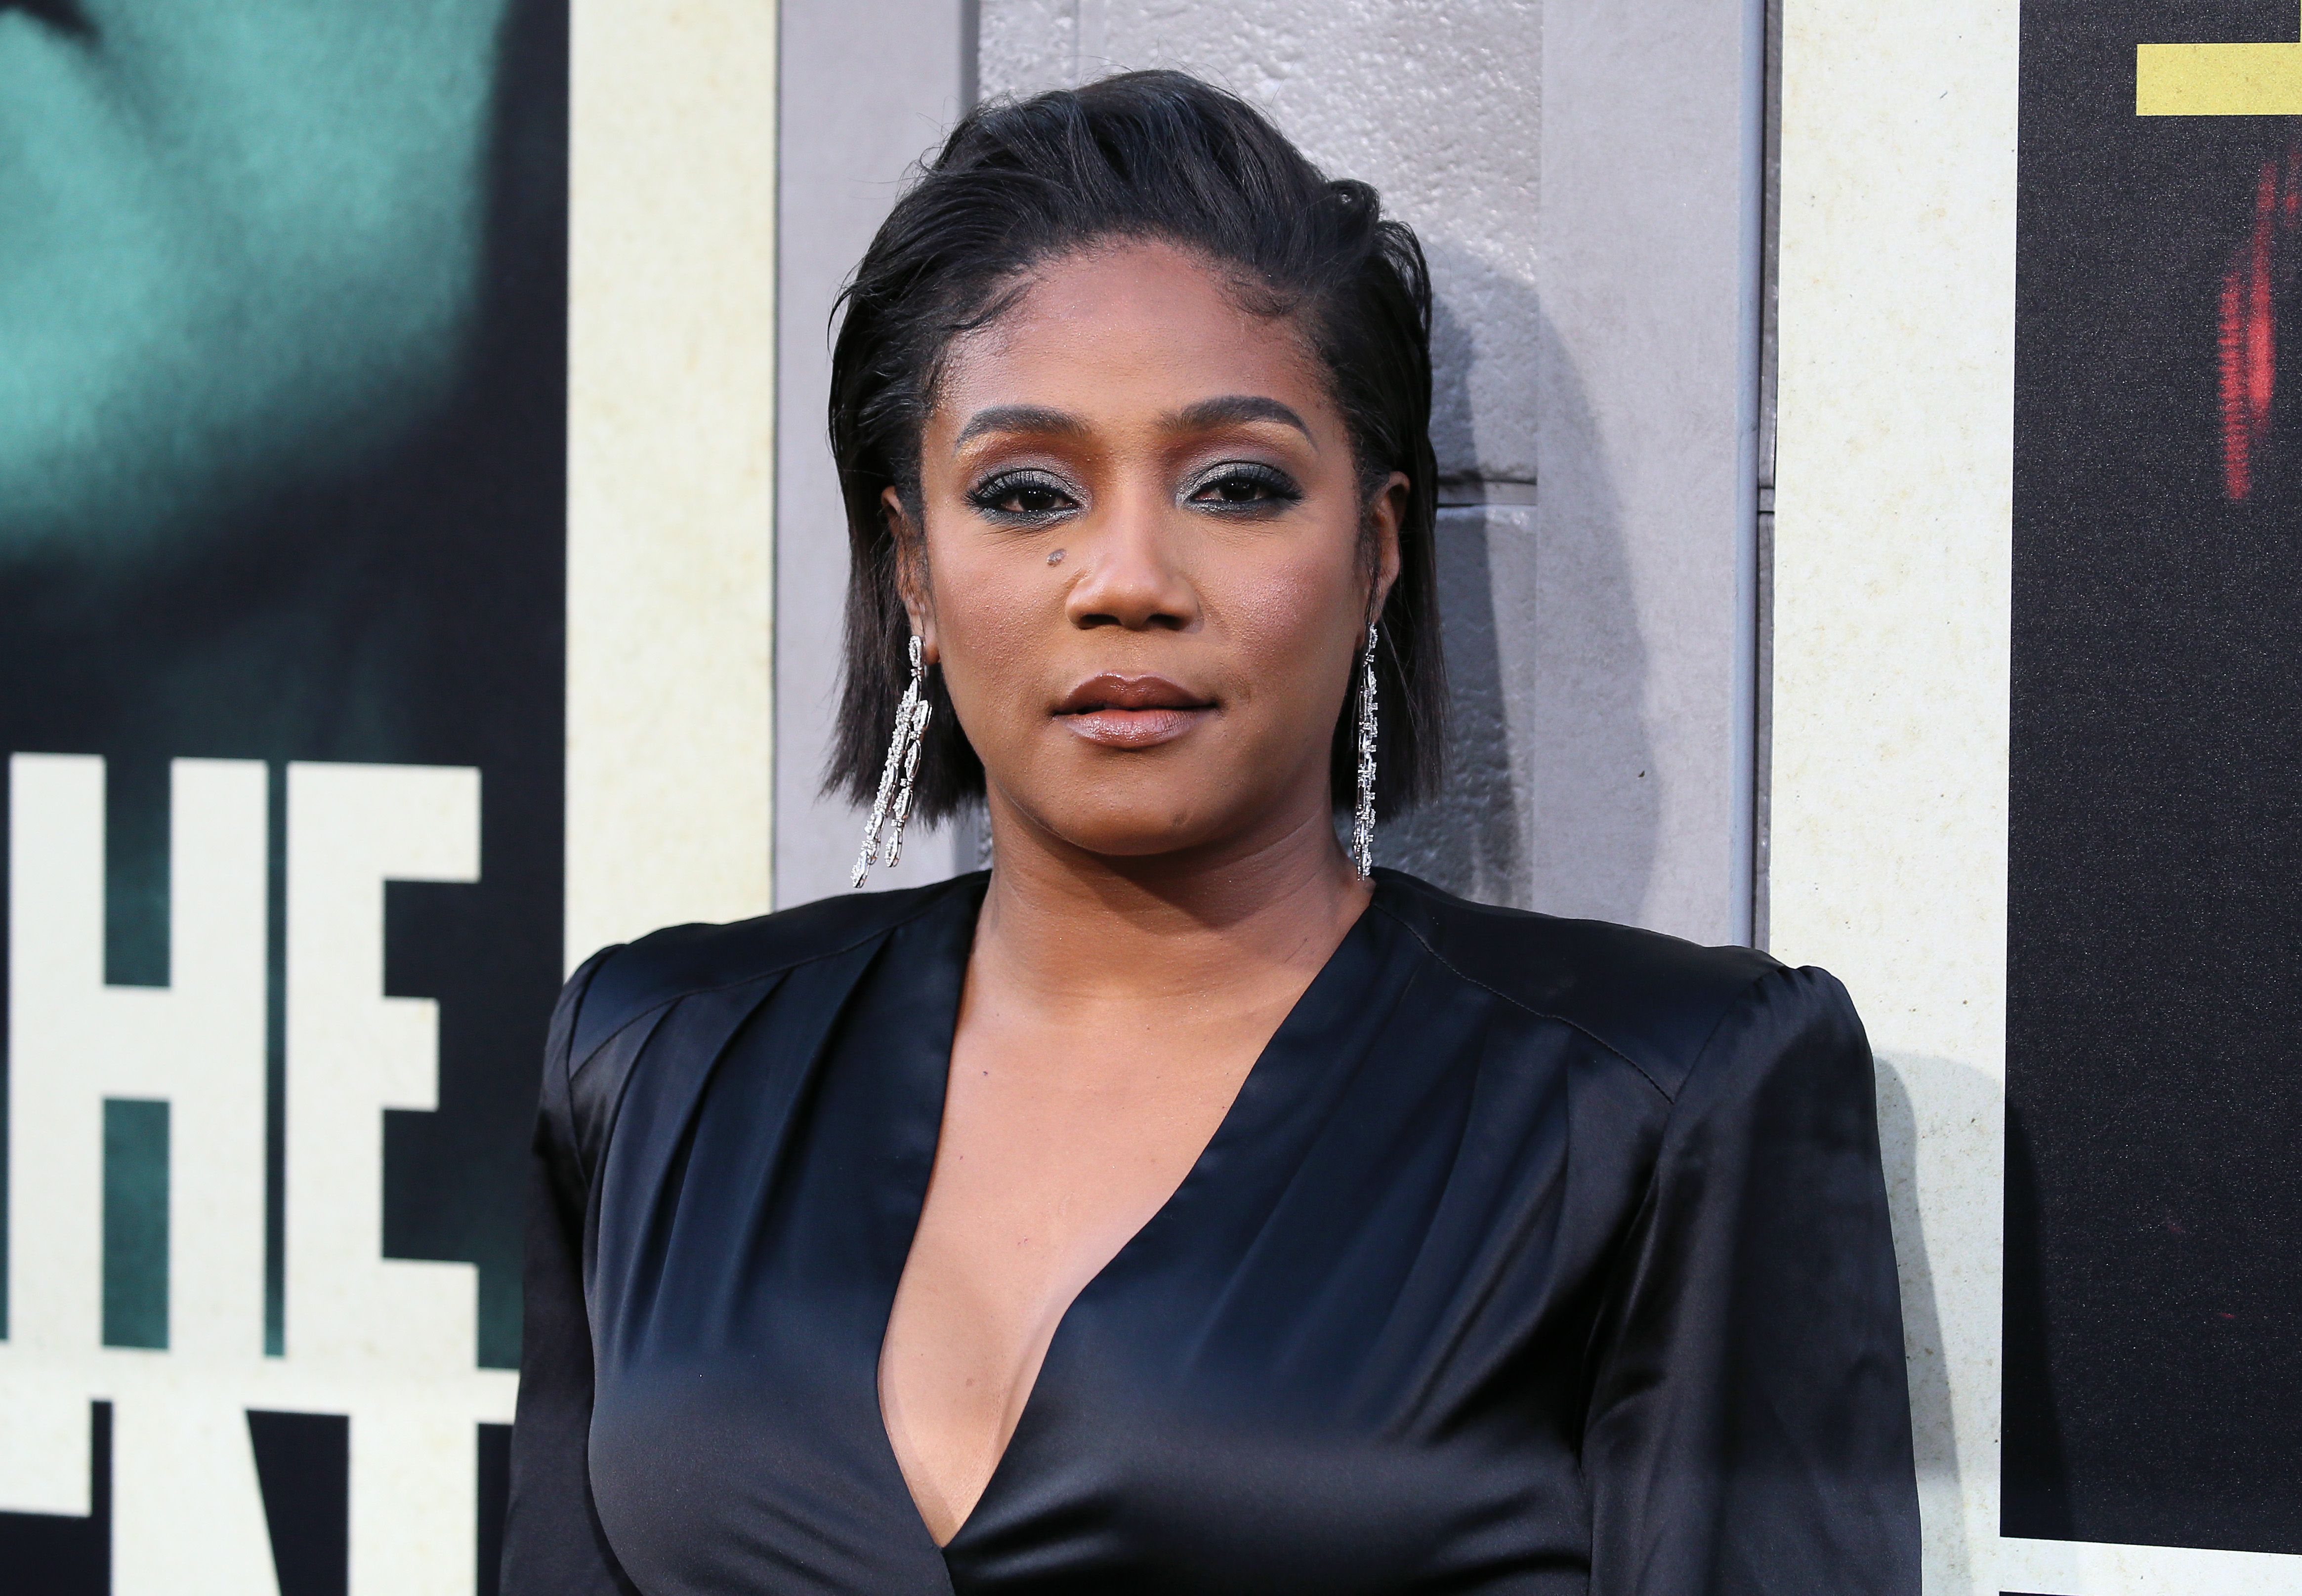 Tiffany Haddish at the premiere of "The Kitchen" in August 2019 in Hollywood | Source: Getty Images